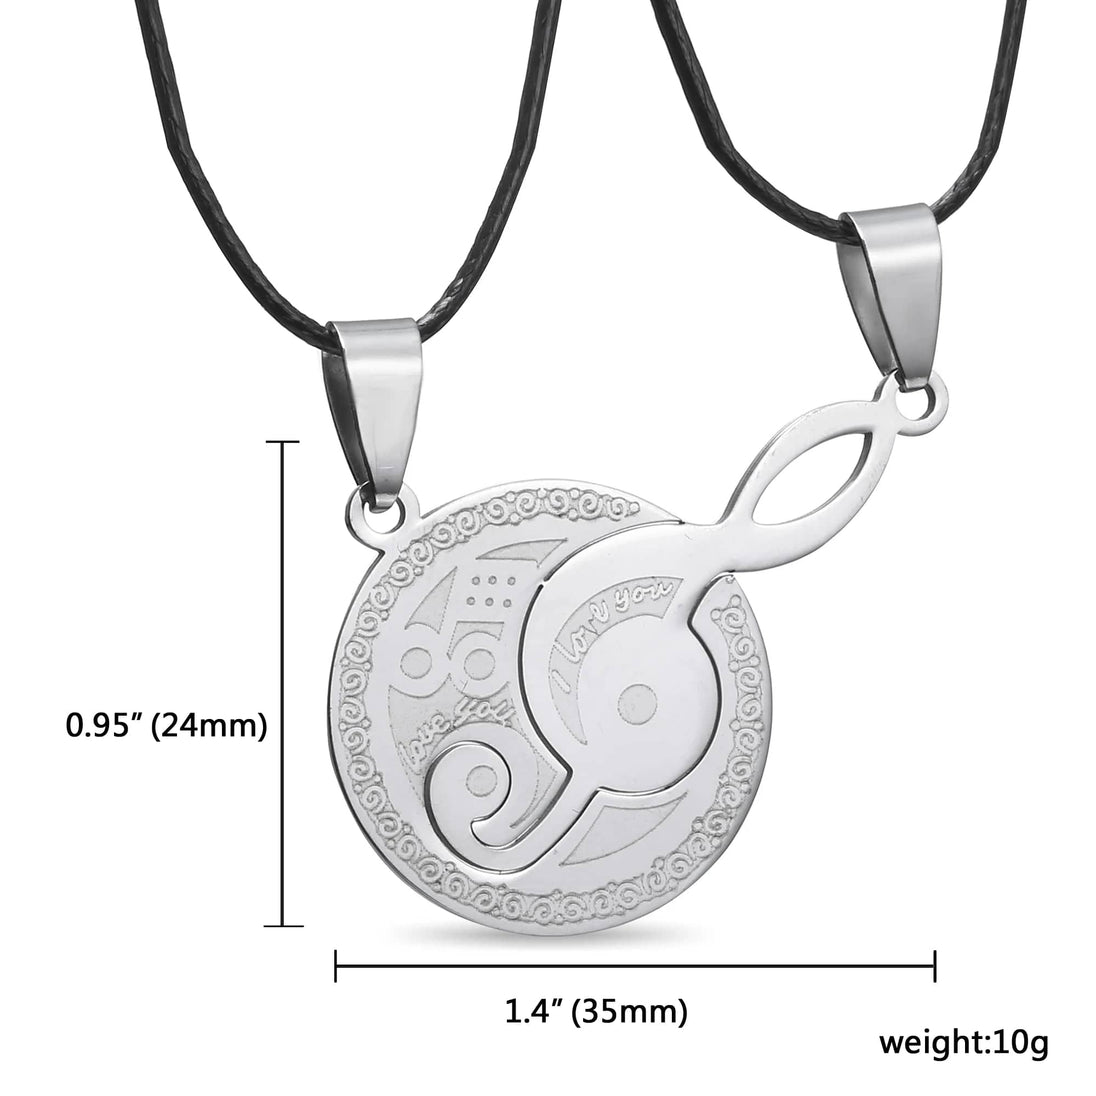 High-Quality 316 Stainless Steel Geometric Music Symbol Pendant Necklace - Simple Design with Leather Rope